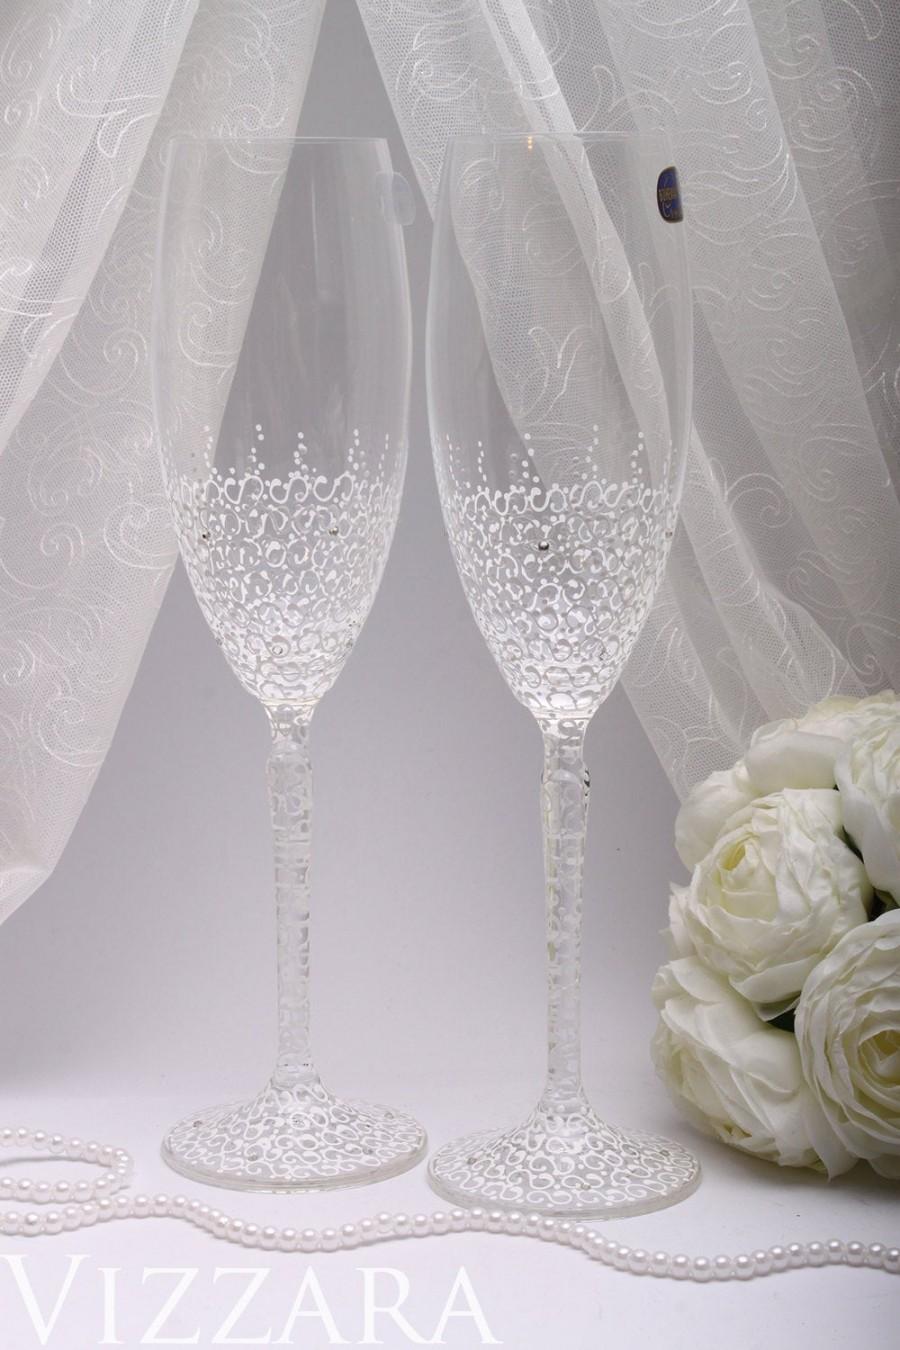 Mariage - Wedding glasses White Hand painted Wedding champagne vintage Wedding Toasting Glasses Wedding Champagne wedding white wedding silver Glasses